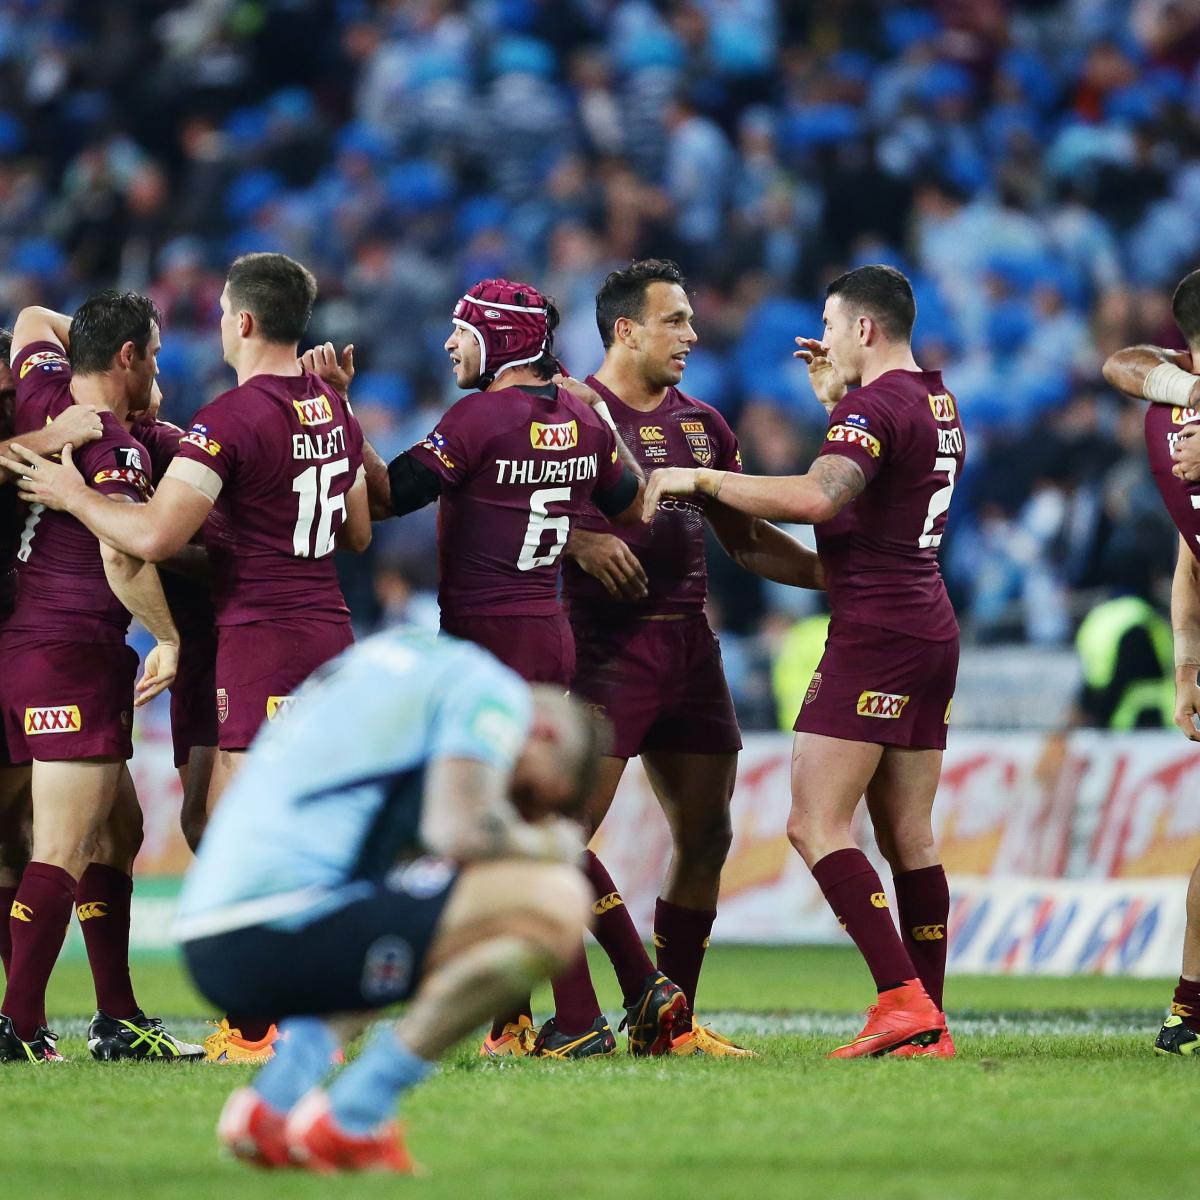 Blues v Maroons Match Highlights, Game III, 2021, State of Origin